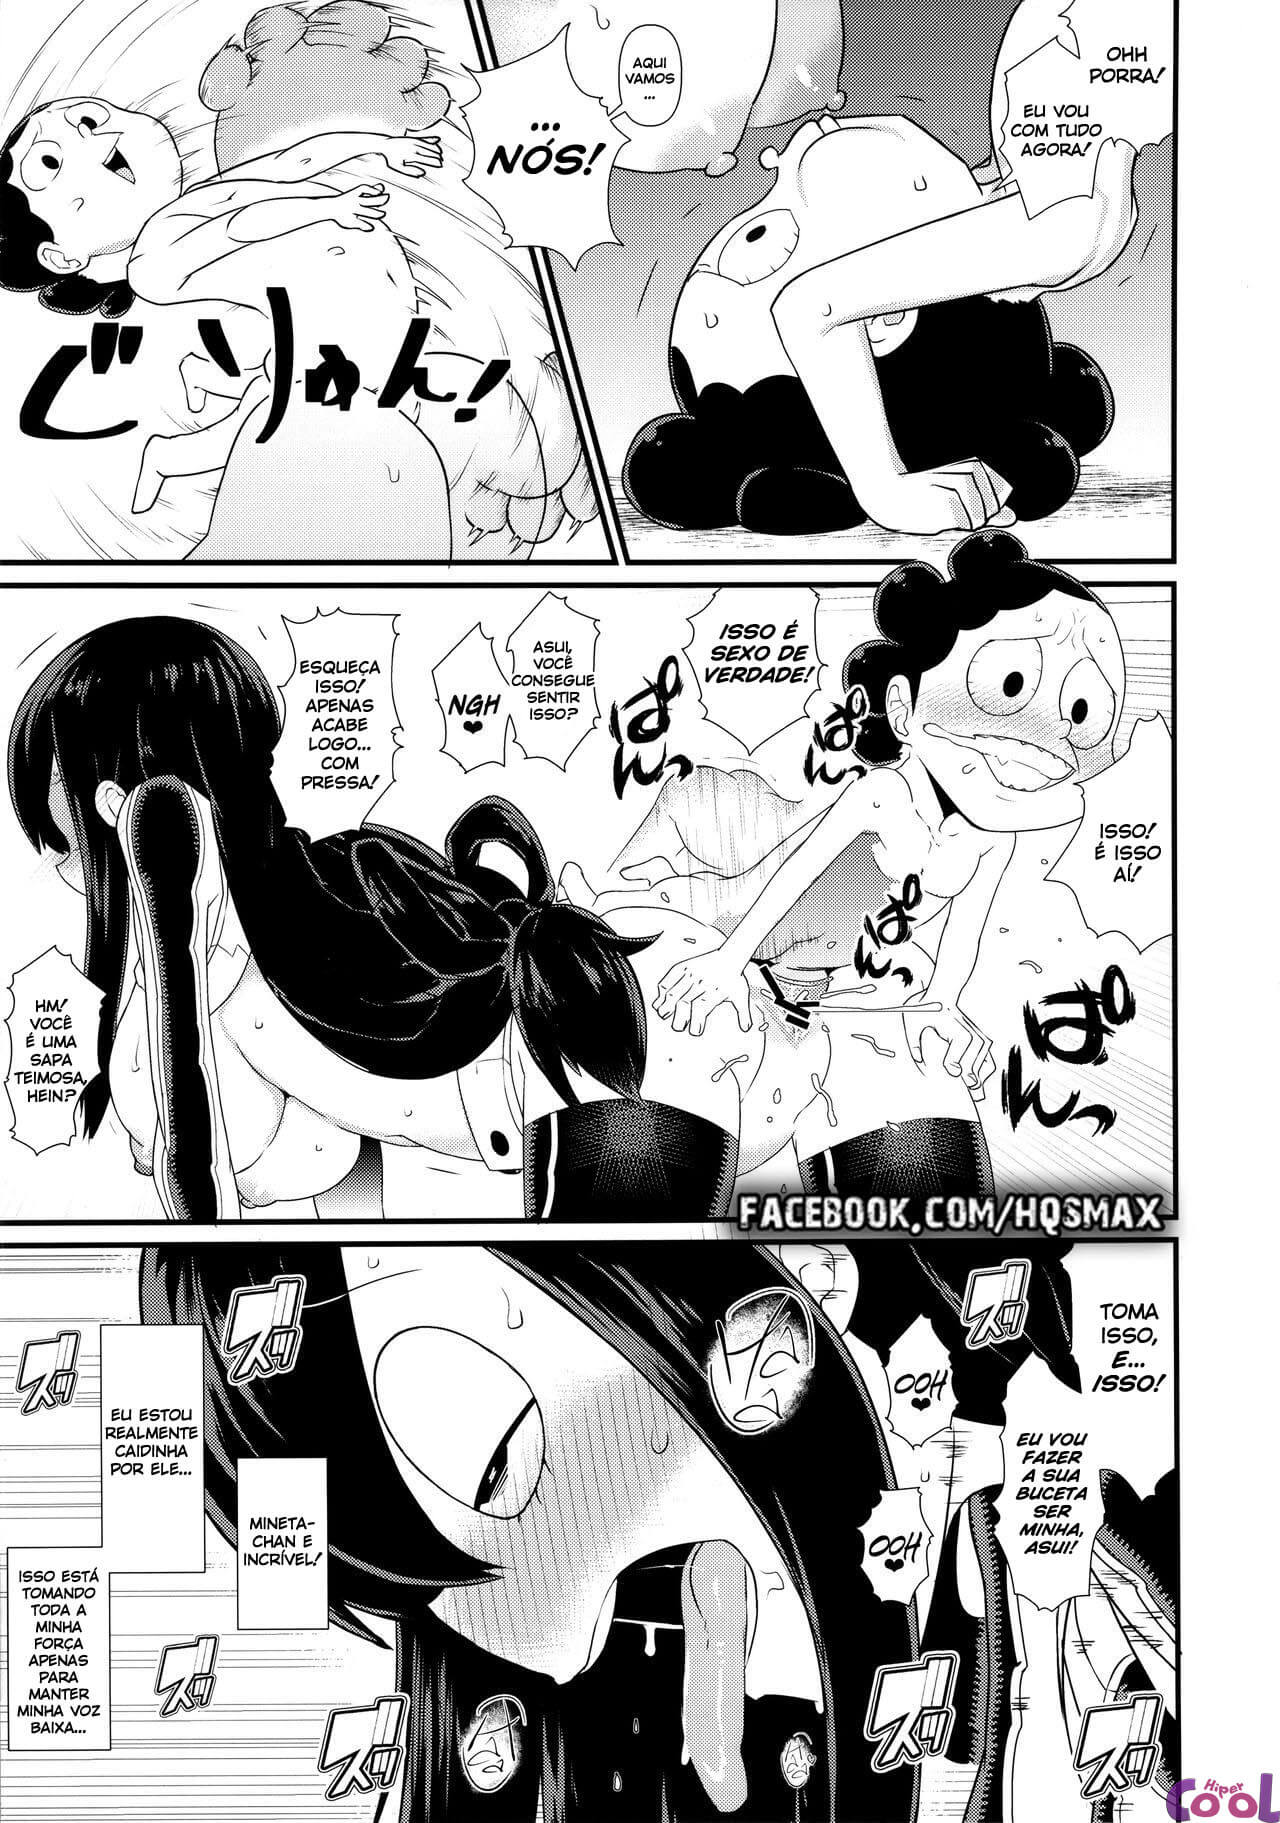 froppy-chapter-01-page-17.jpg